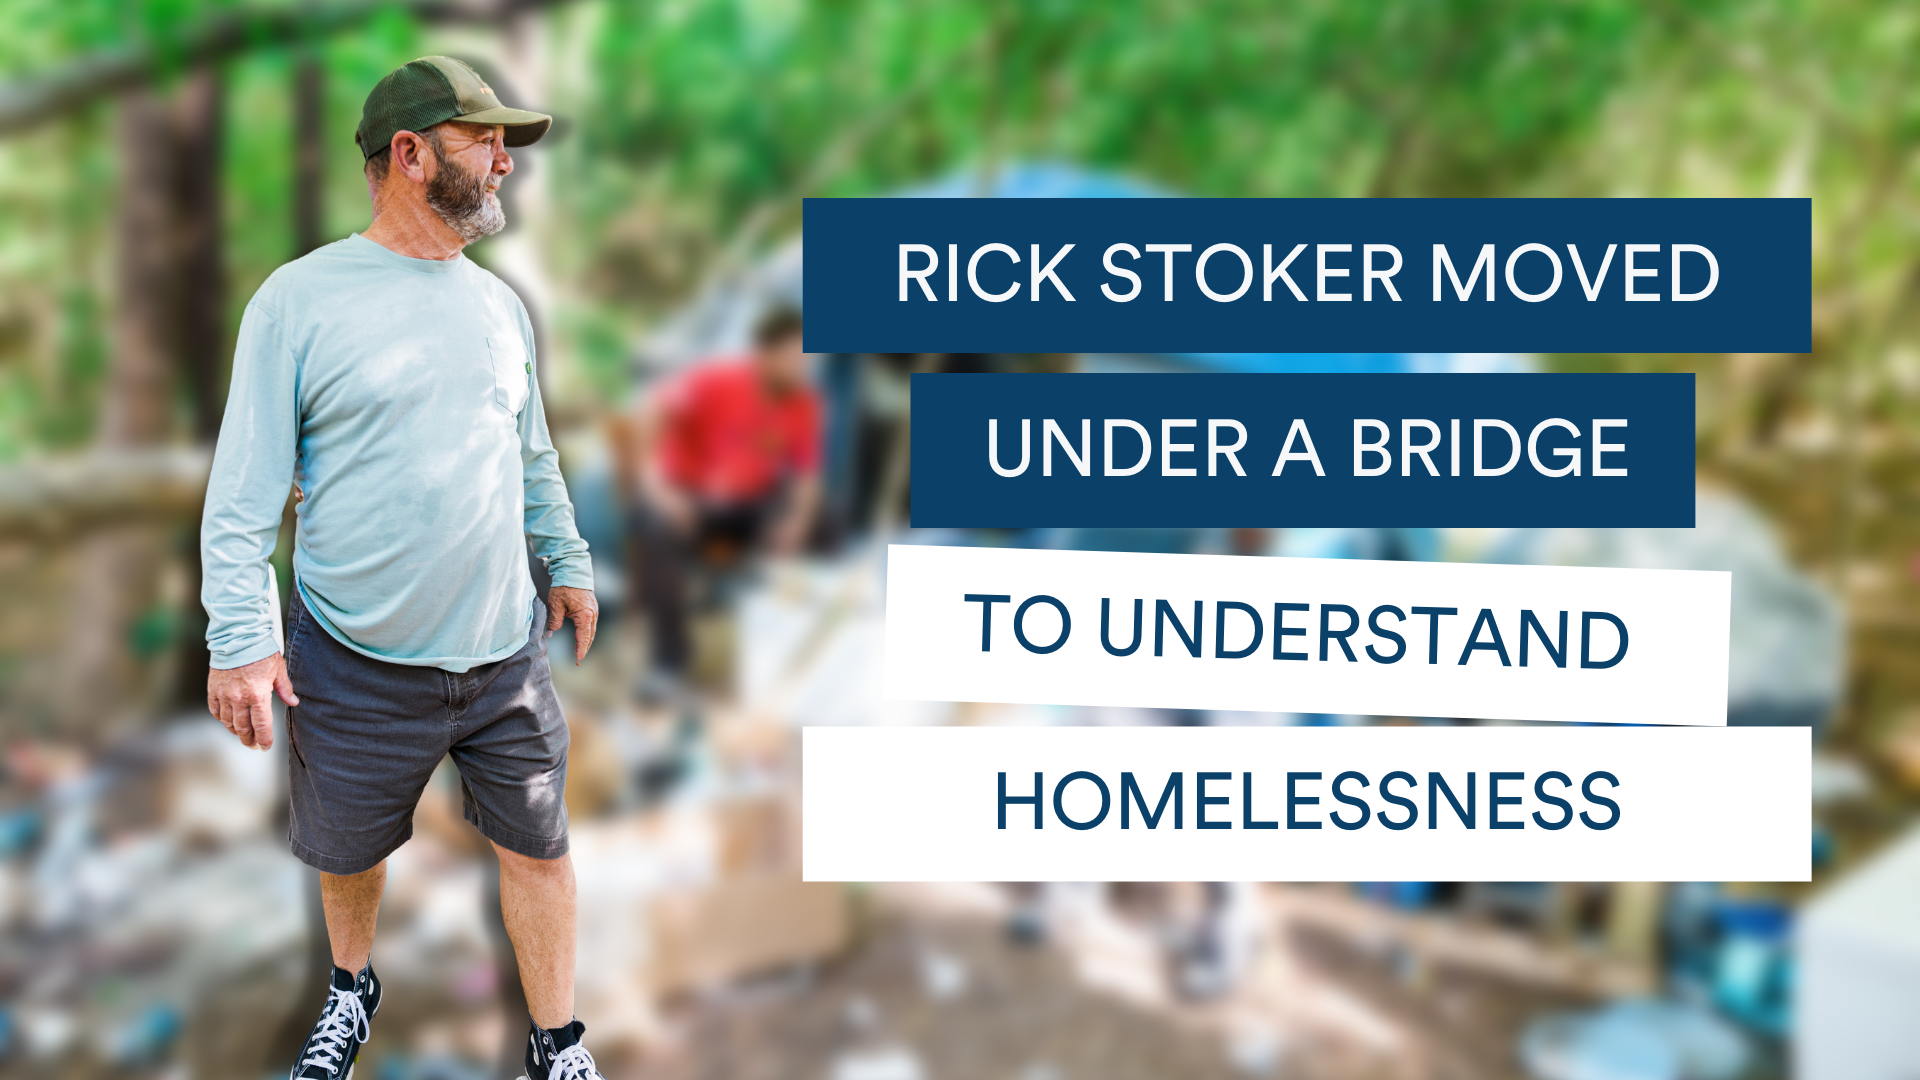 Founder Rick Stoker moved under a bridge to experience homelessness